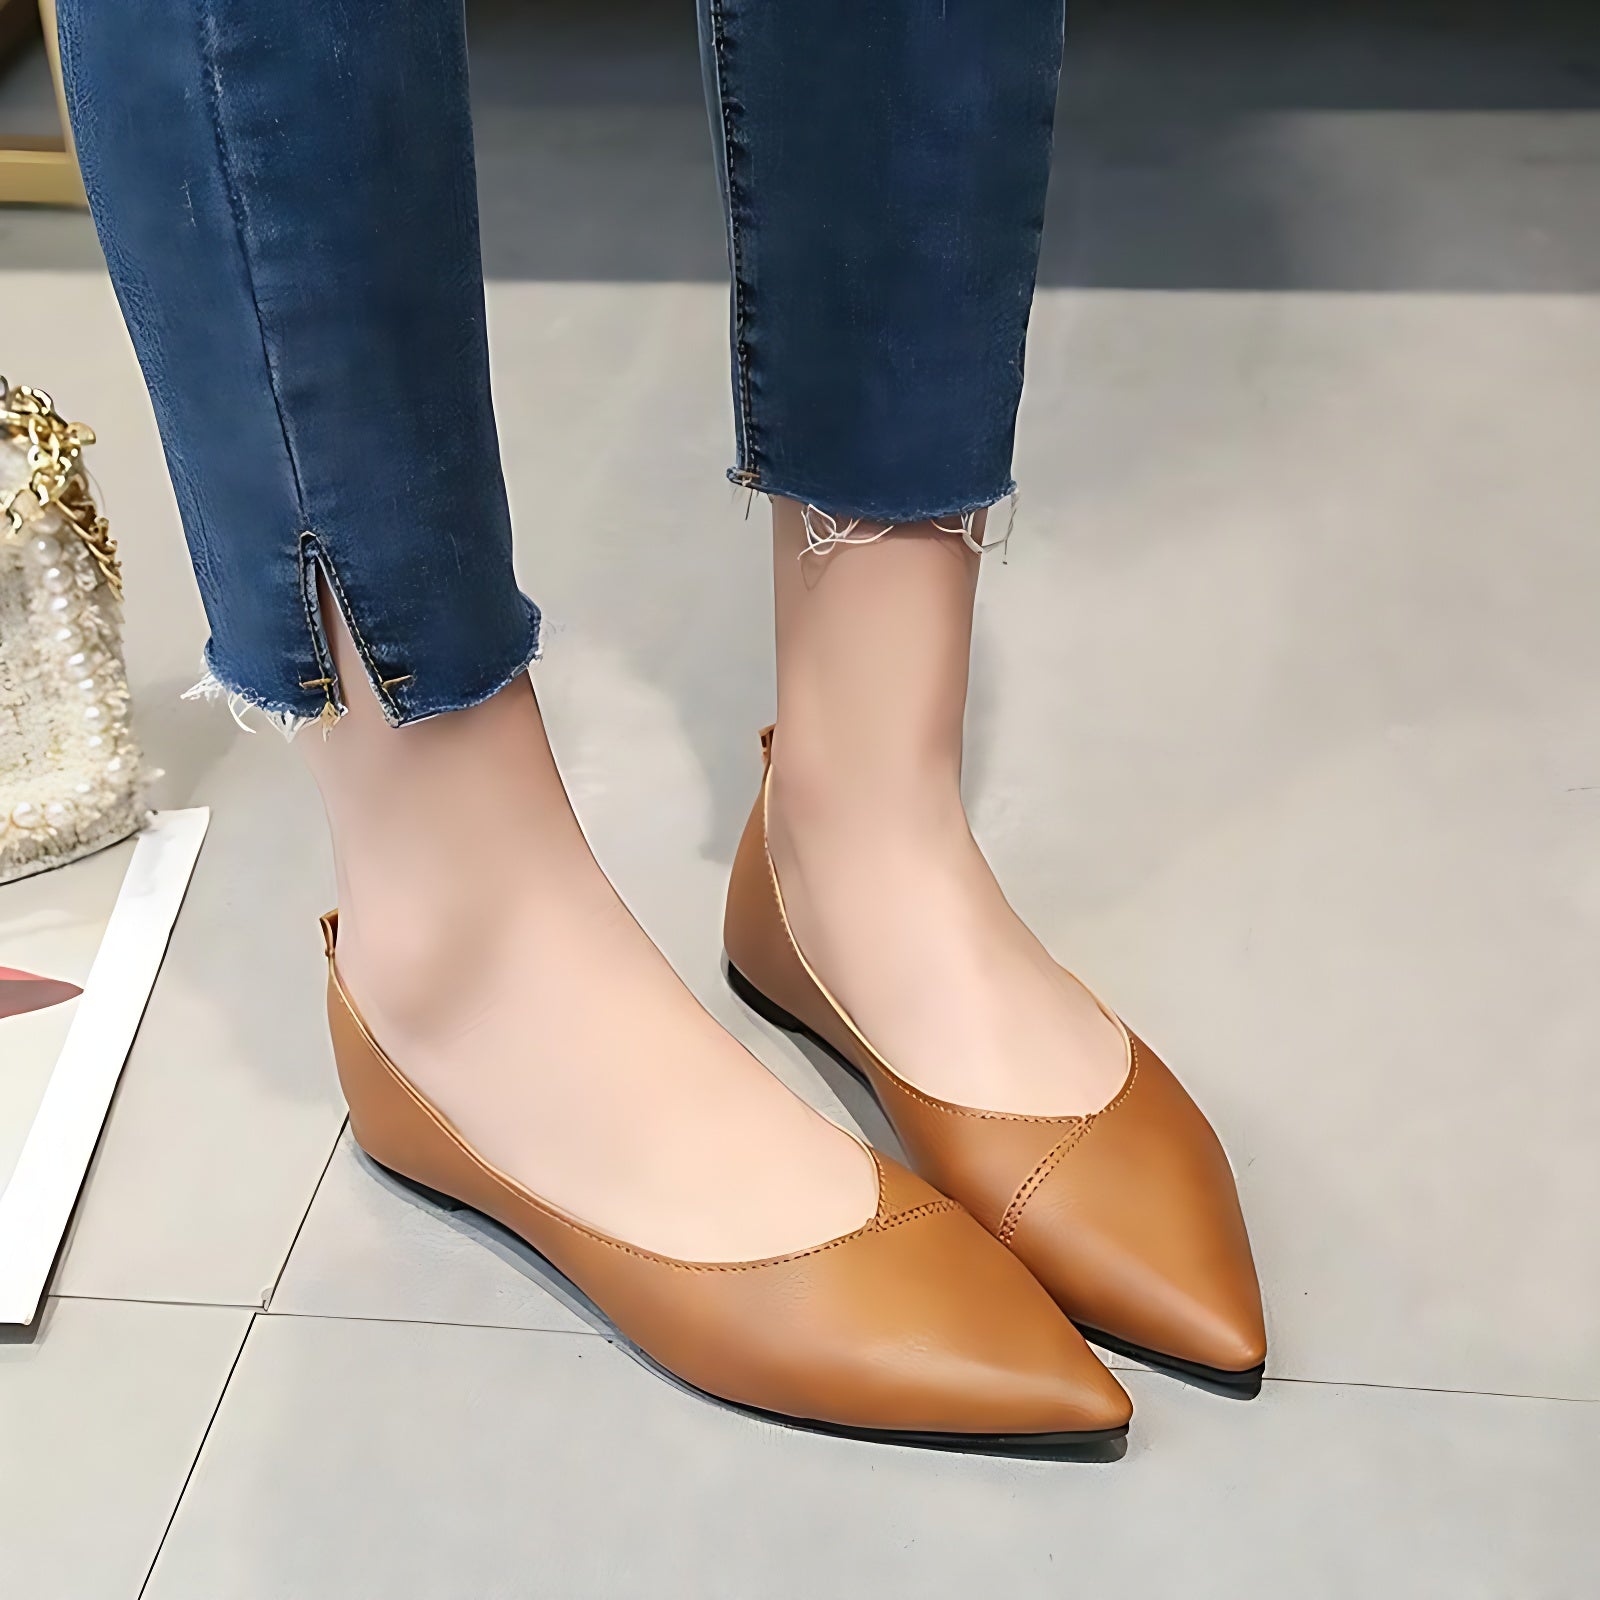 Women's Casual Shoes 2021 Soft PU Leather Ballet Flats Pointed Toe Shallow Mouth Slip-on Ladies Loafer - Touchy Style .